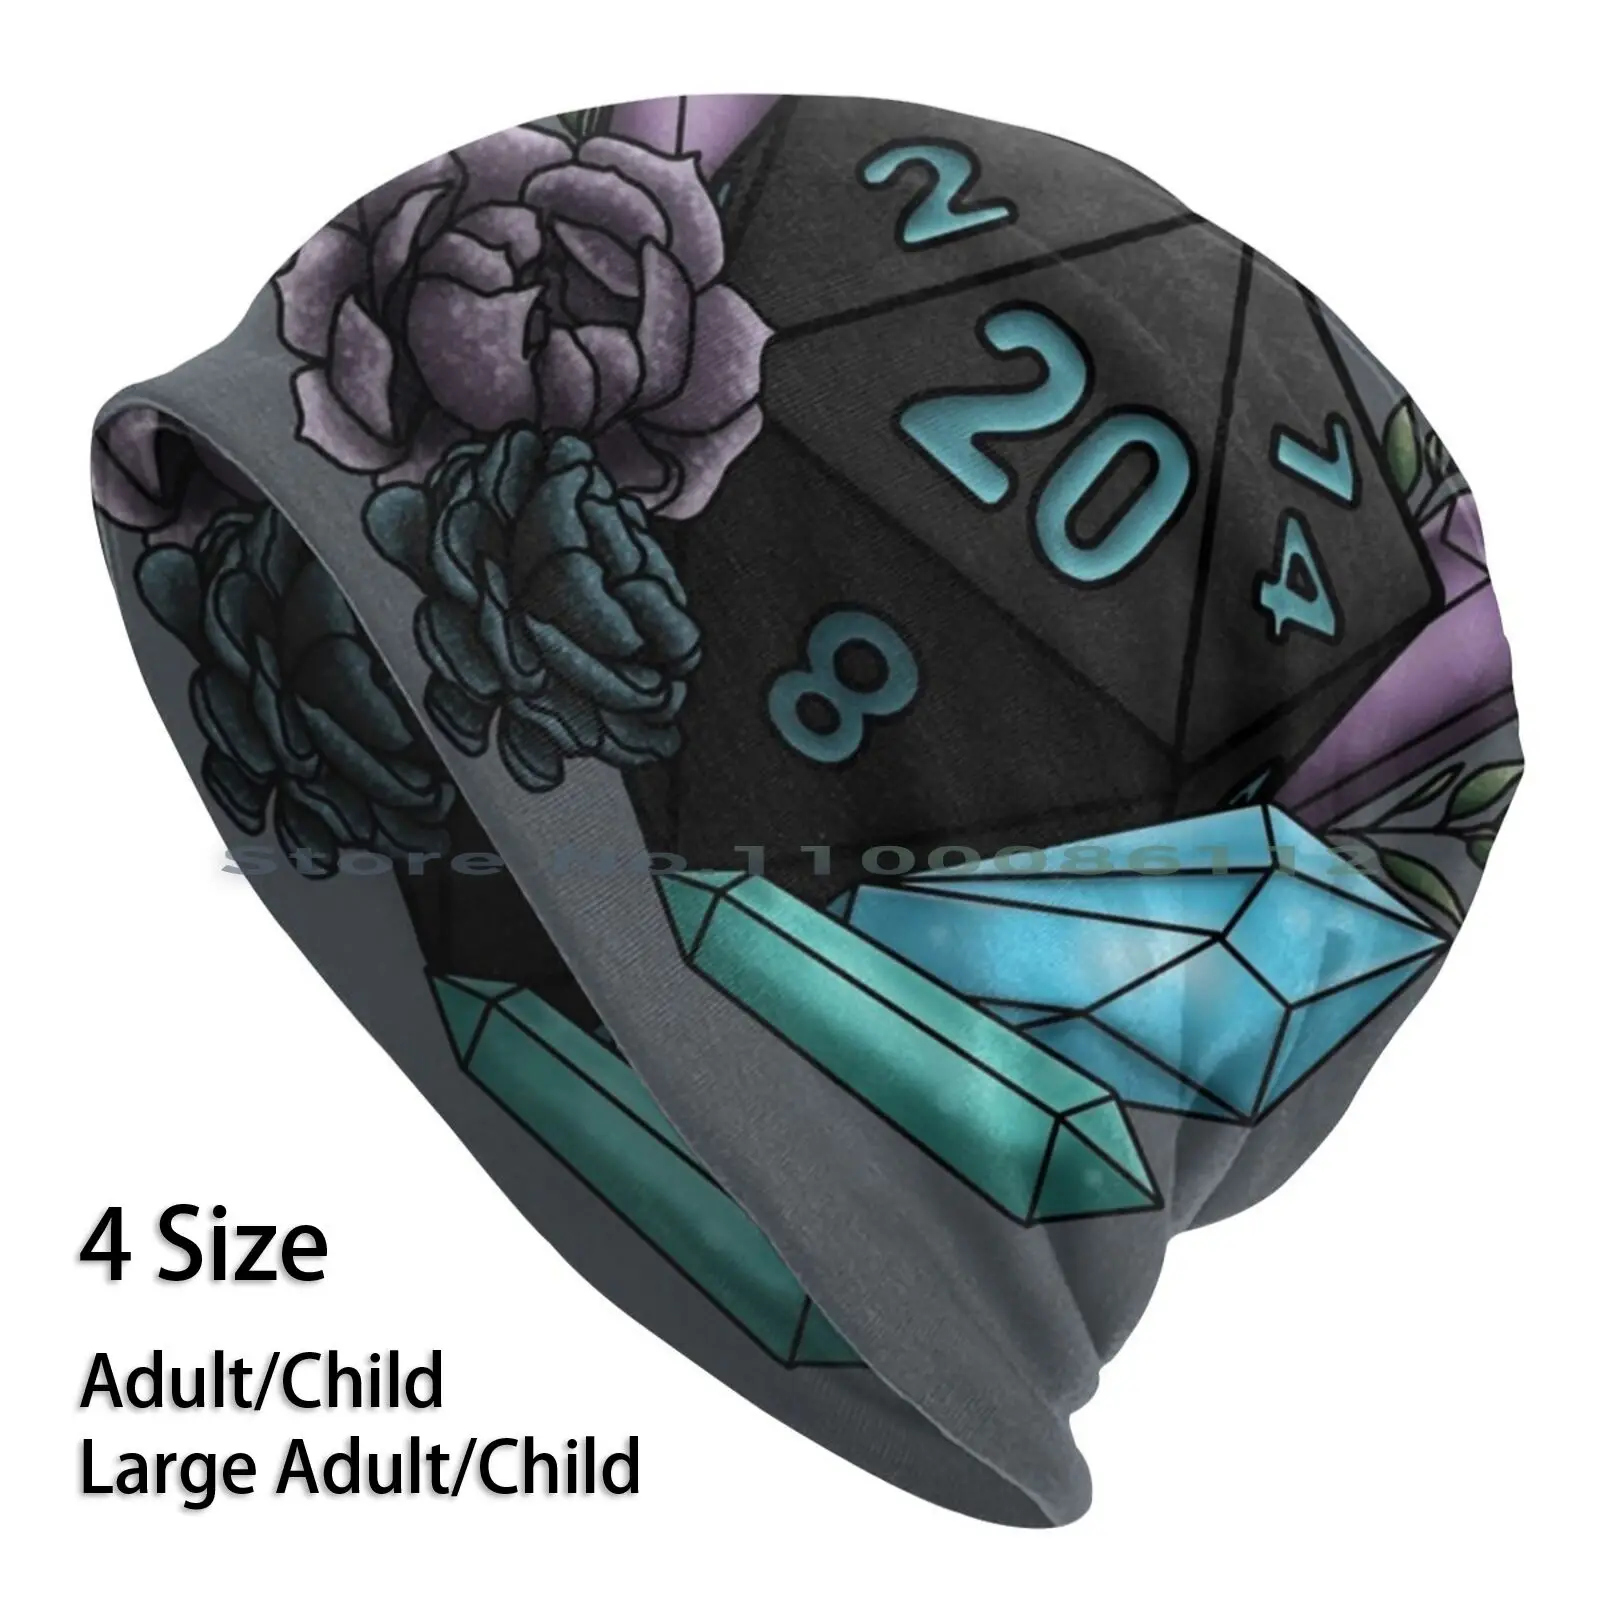 

Mystic Class D20-Tabletop Gaming Dice Beanies Knit Hat D20 Dnd And Dice Feminine Games Nerdy Geeky Geek Girl Girl Gamer